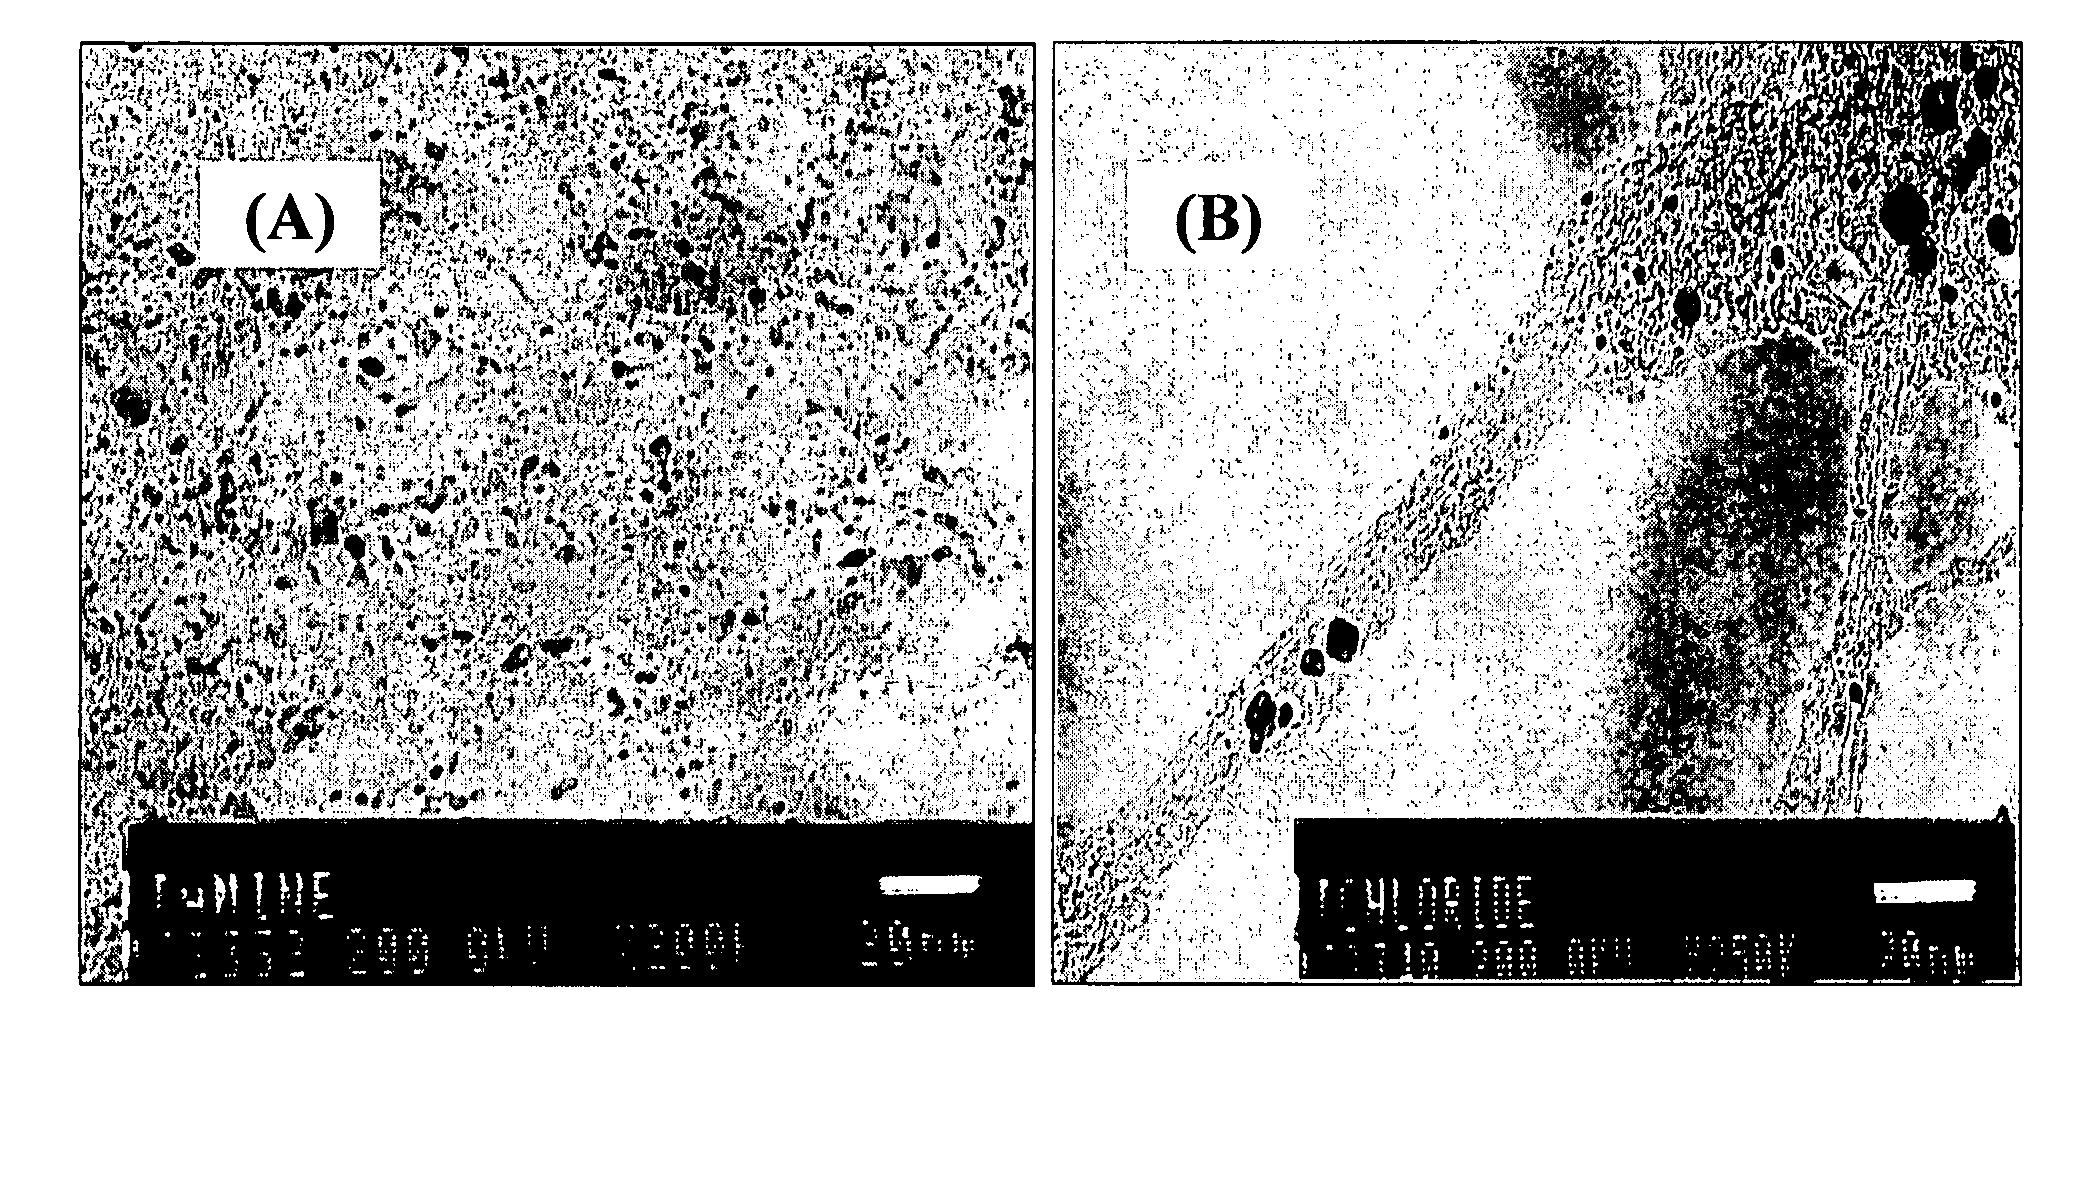 Carbon nanotube pastes and methods of use